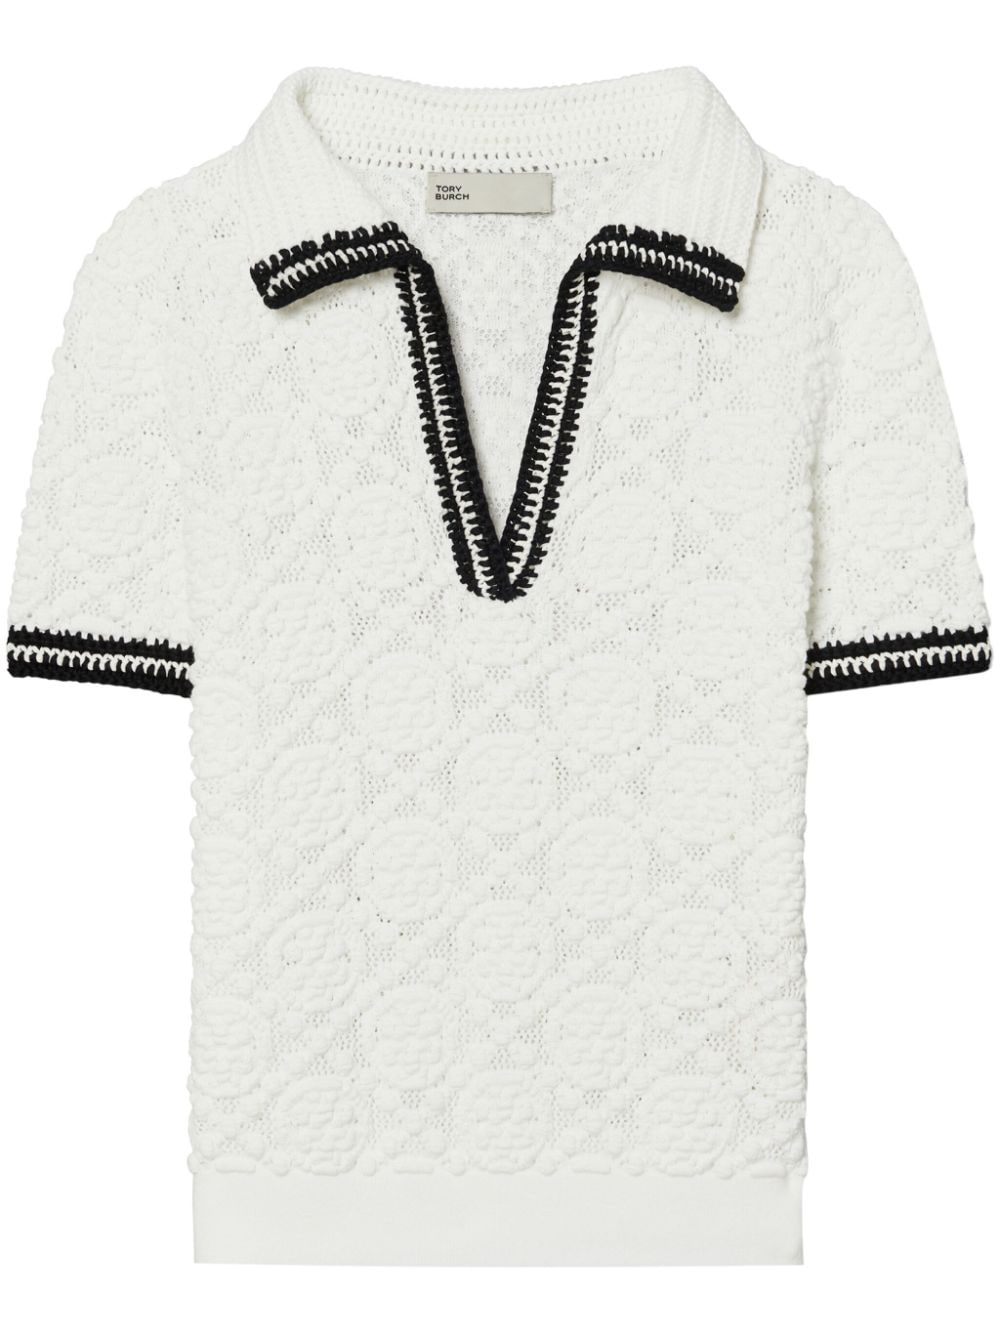 Tory Burch pointelle knitted cotton polo shirt - White von Tory Burch